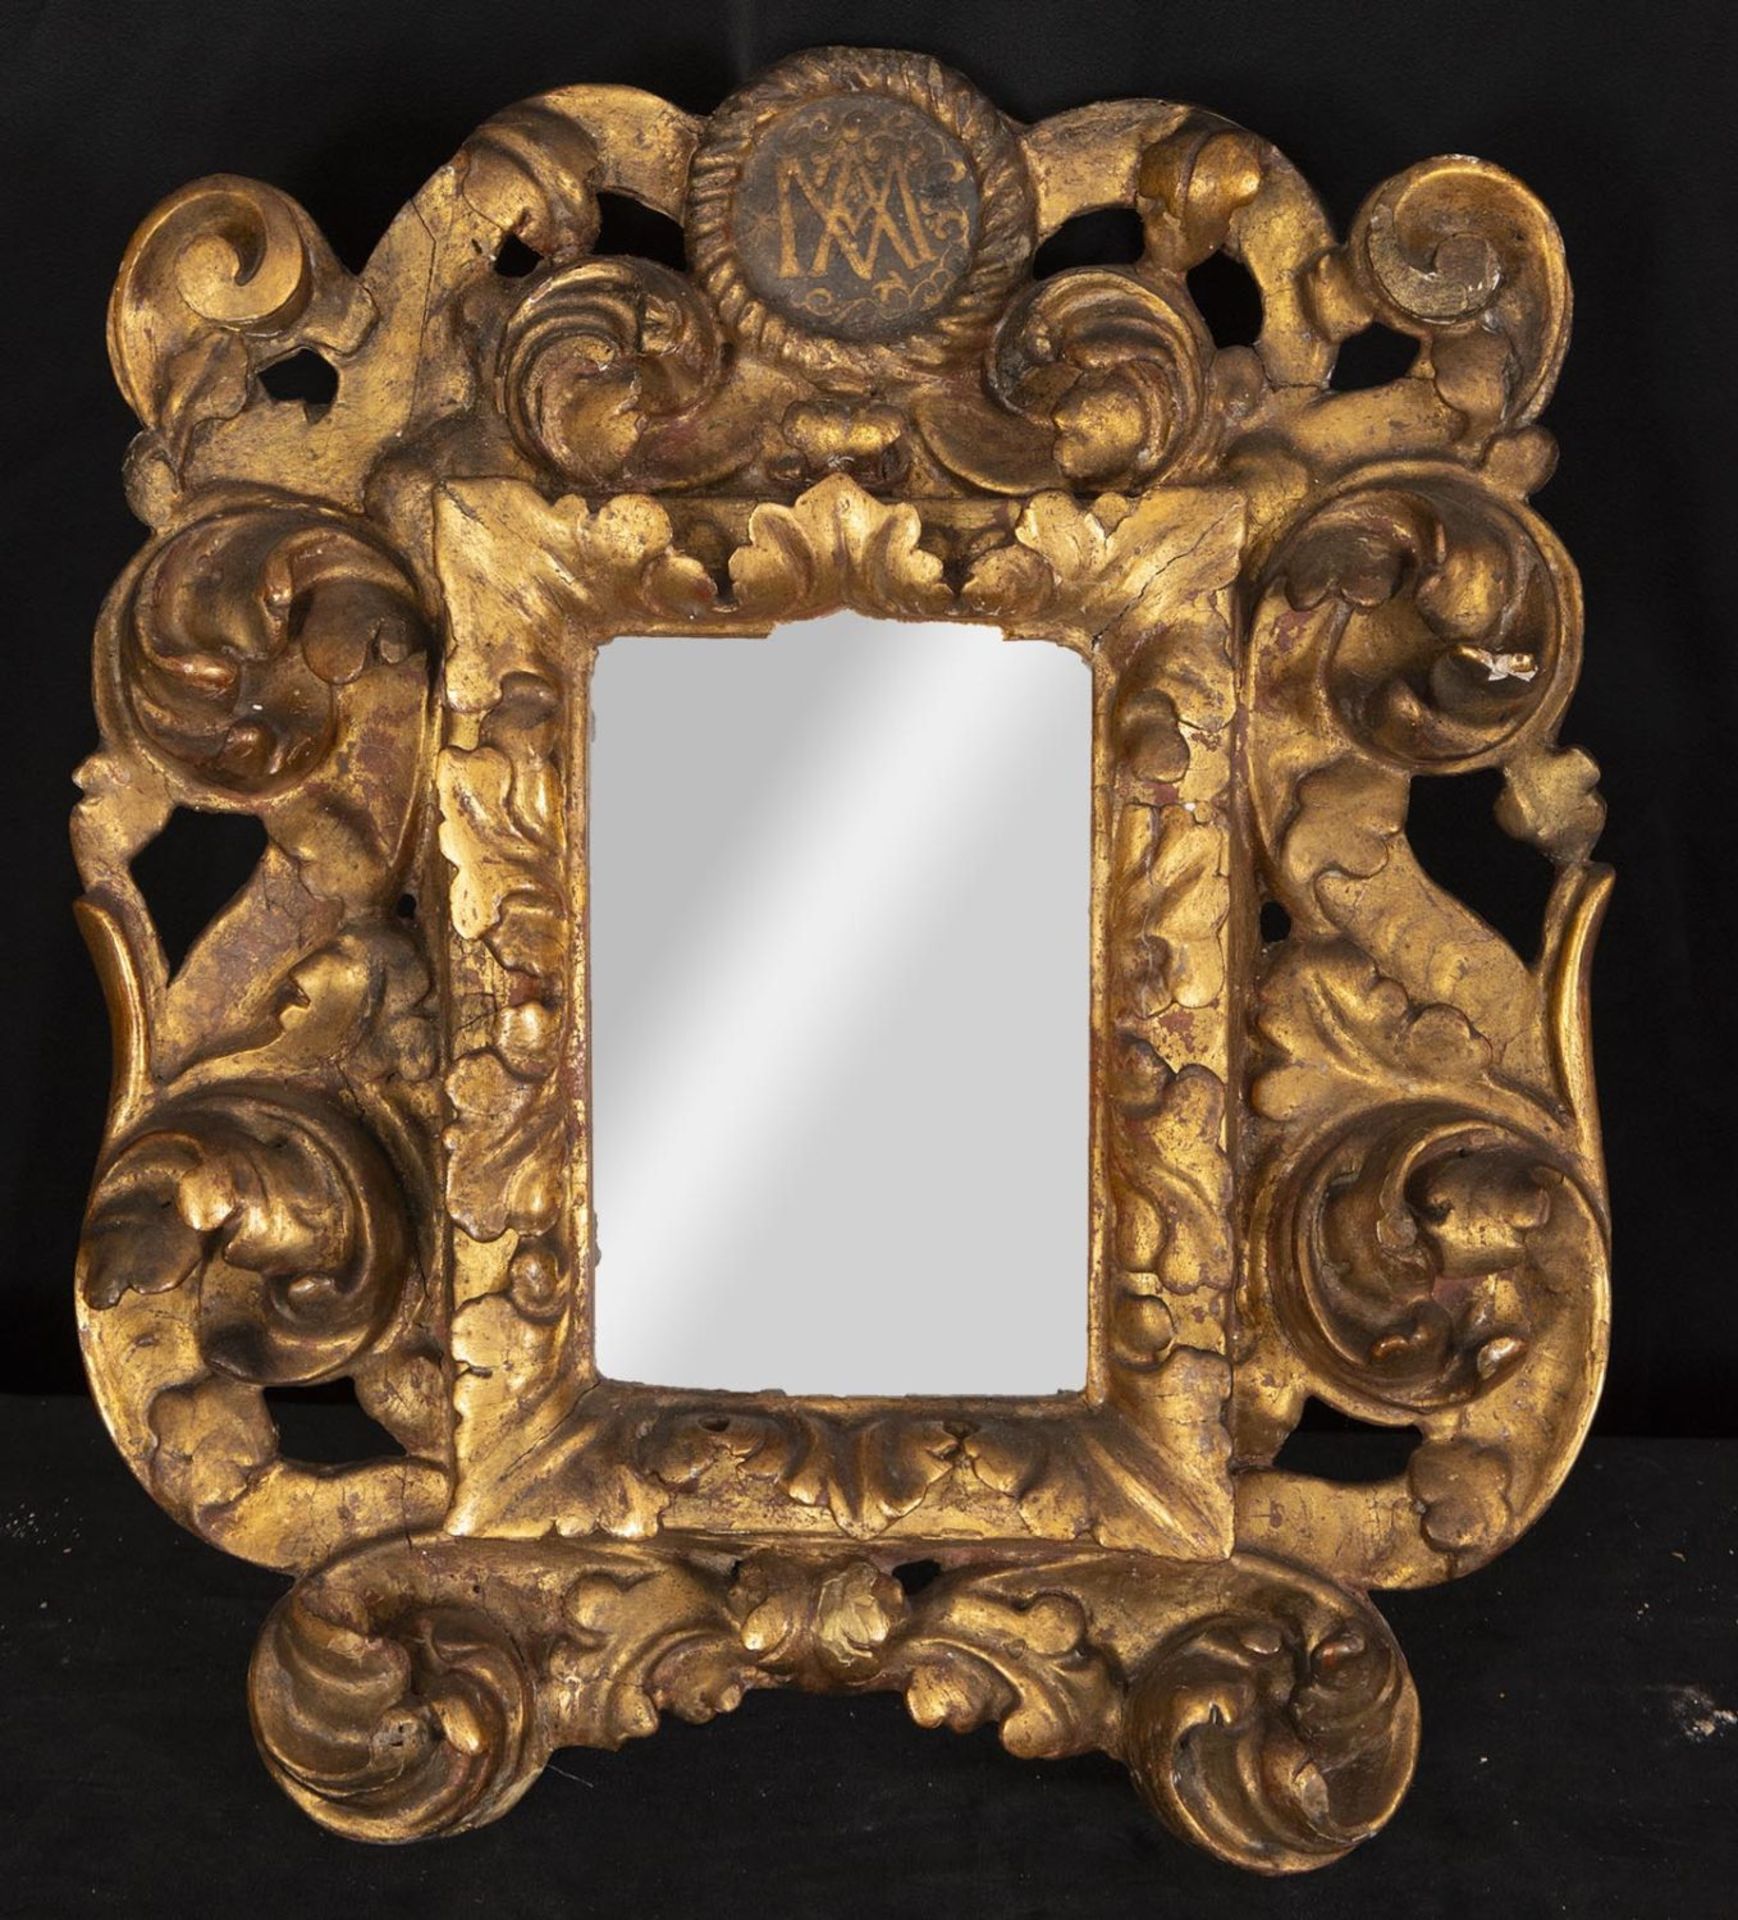 Important Spanish Baroque frame from the late 17th century cornucopia type